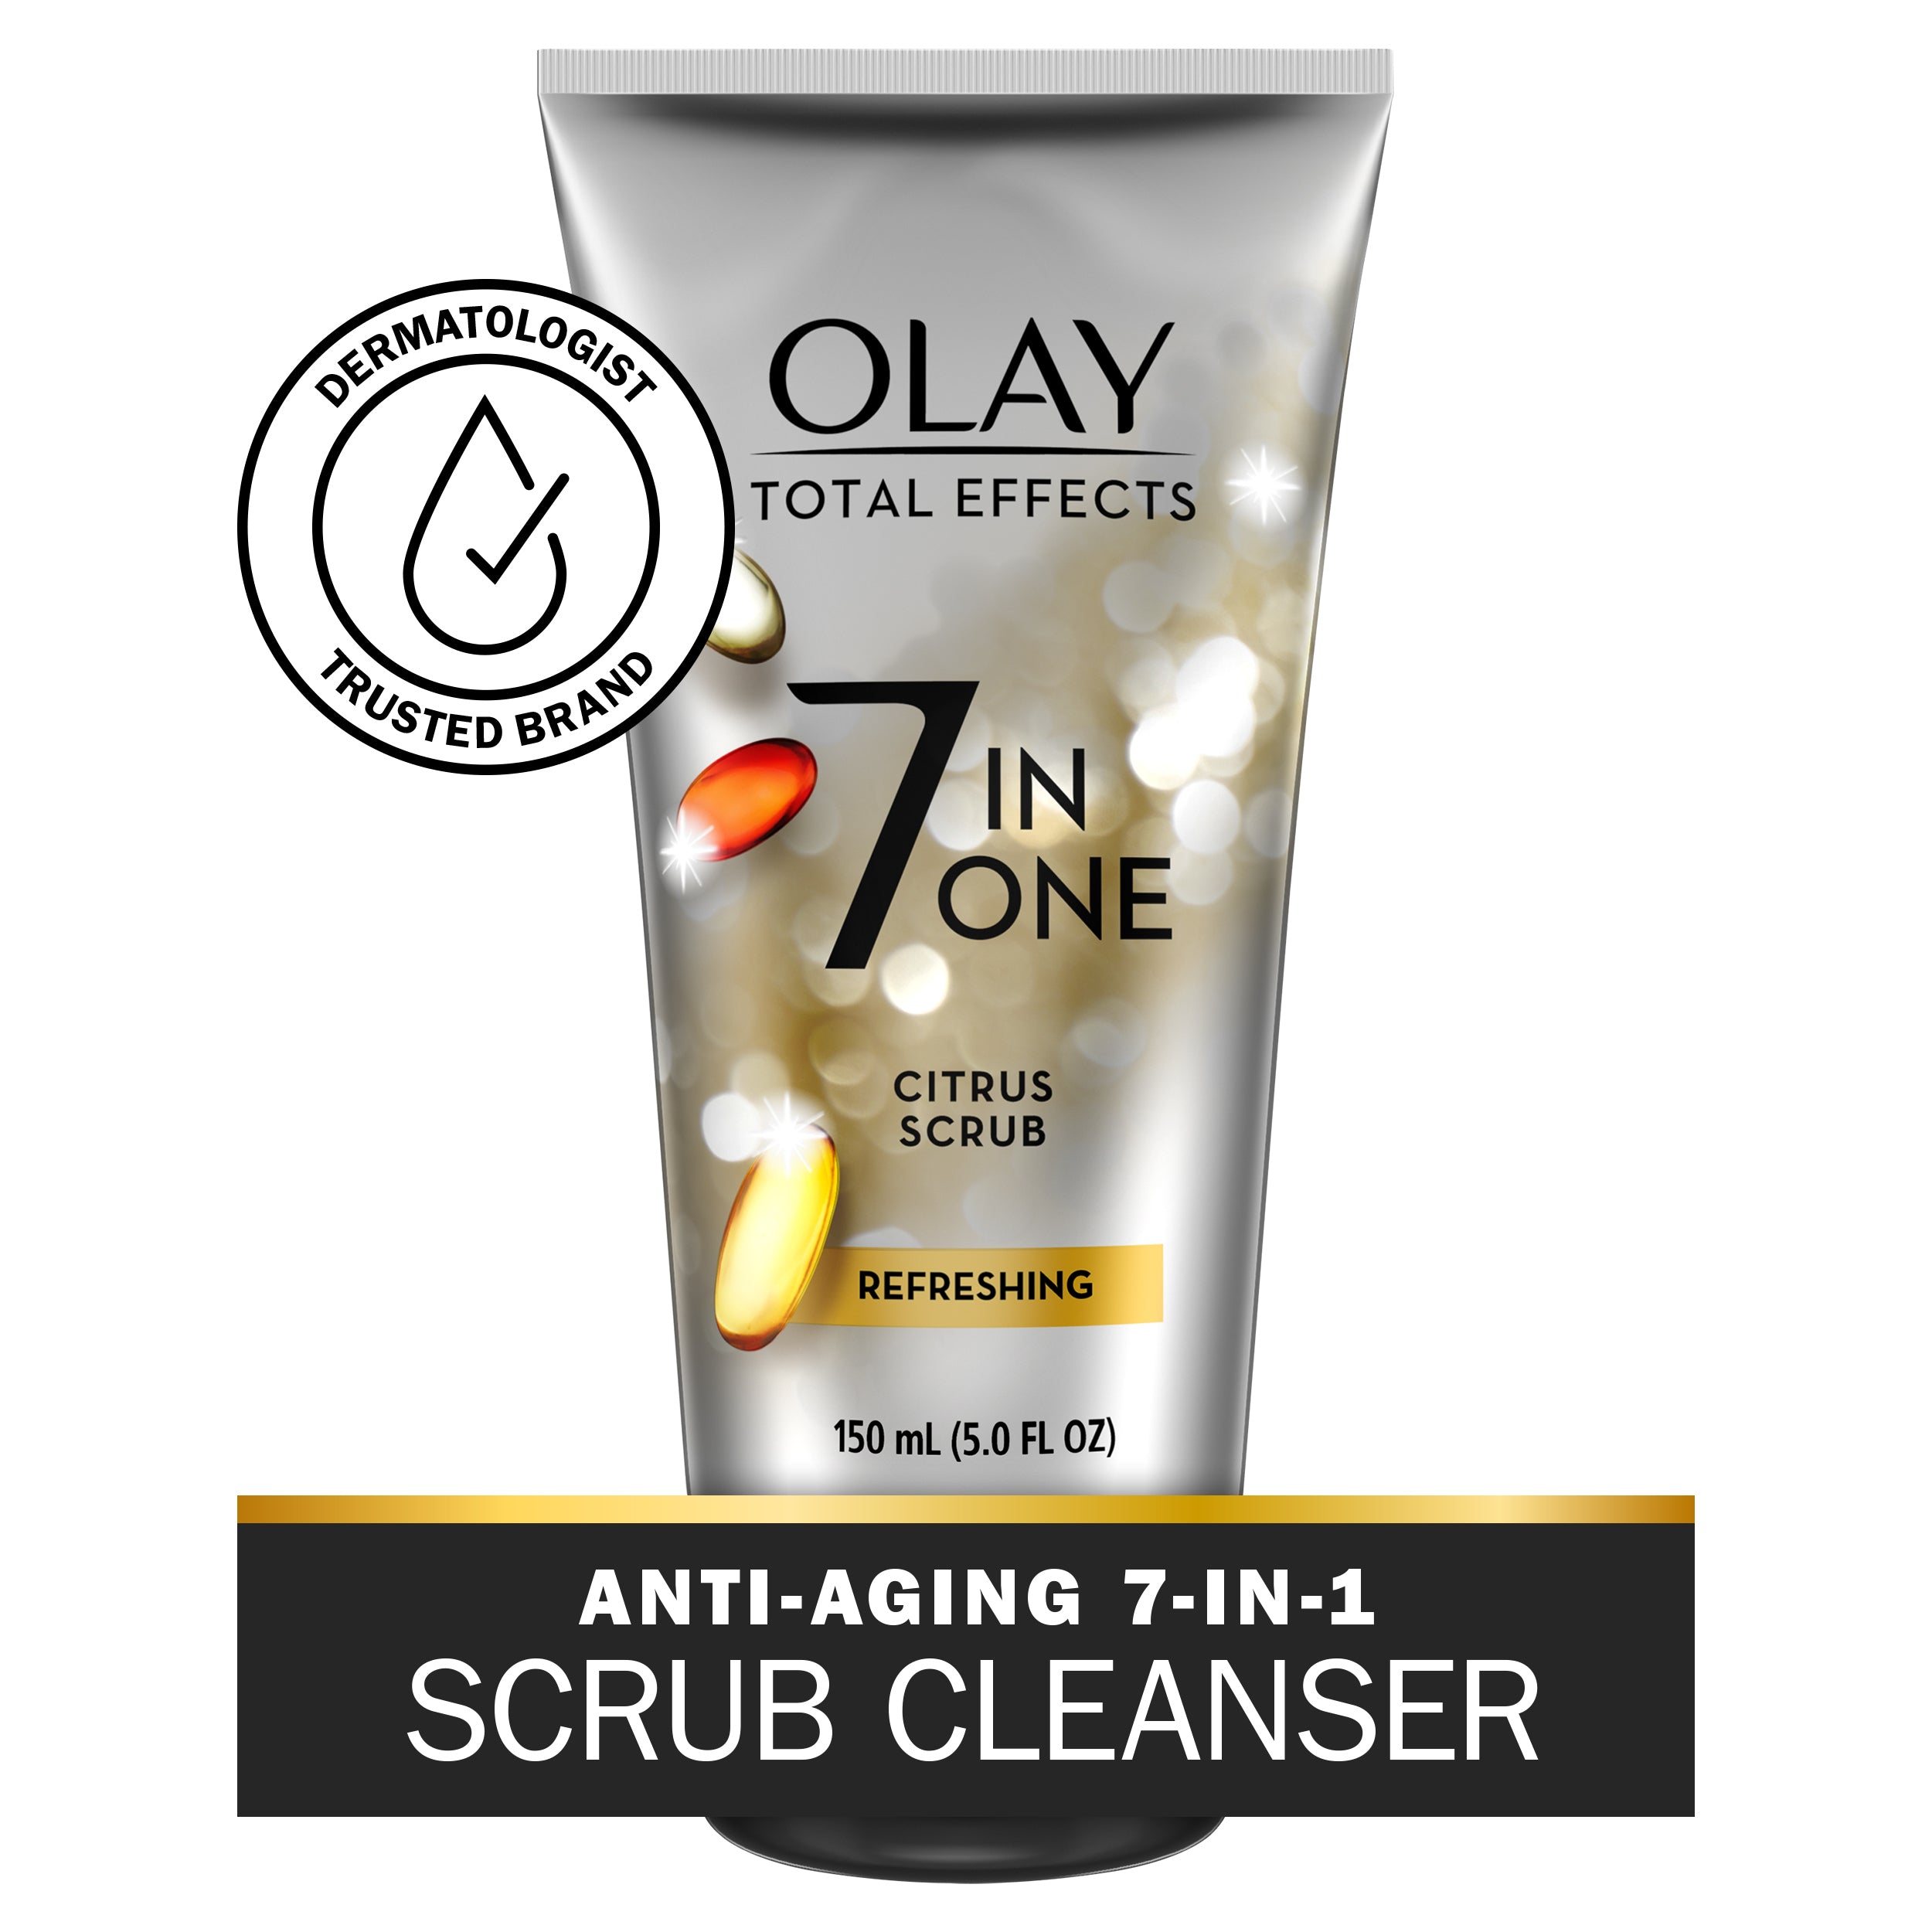 Olay Total Effects Face Wash, 7 in 1 Refreshing Citrus Scrub, All Skin Types, 5 fl oz | MTTS320